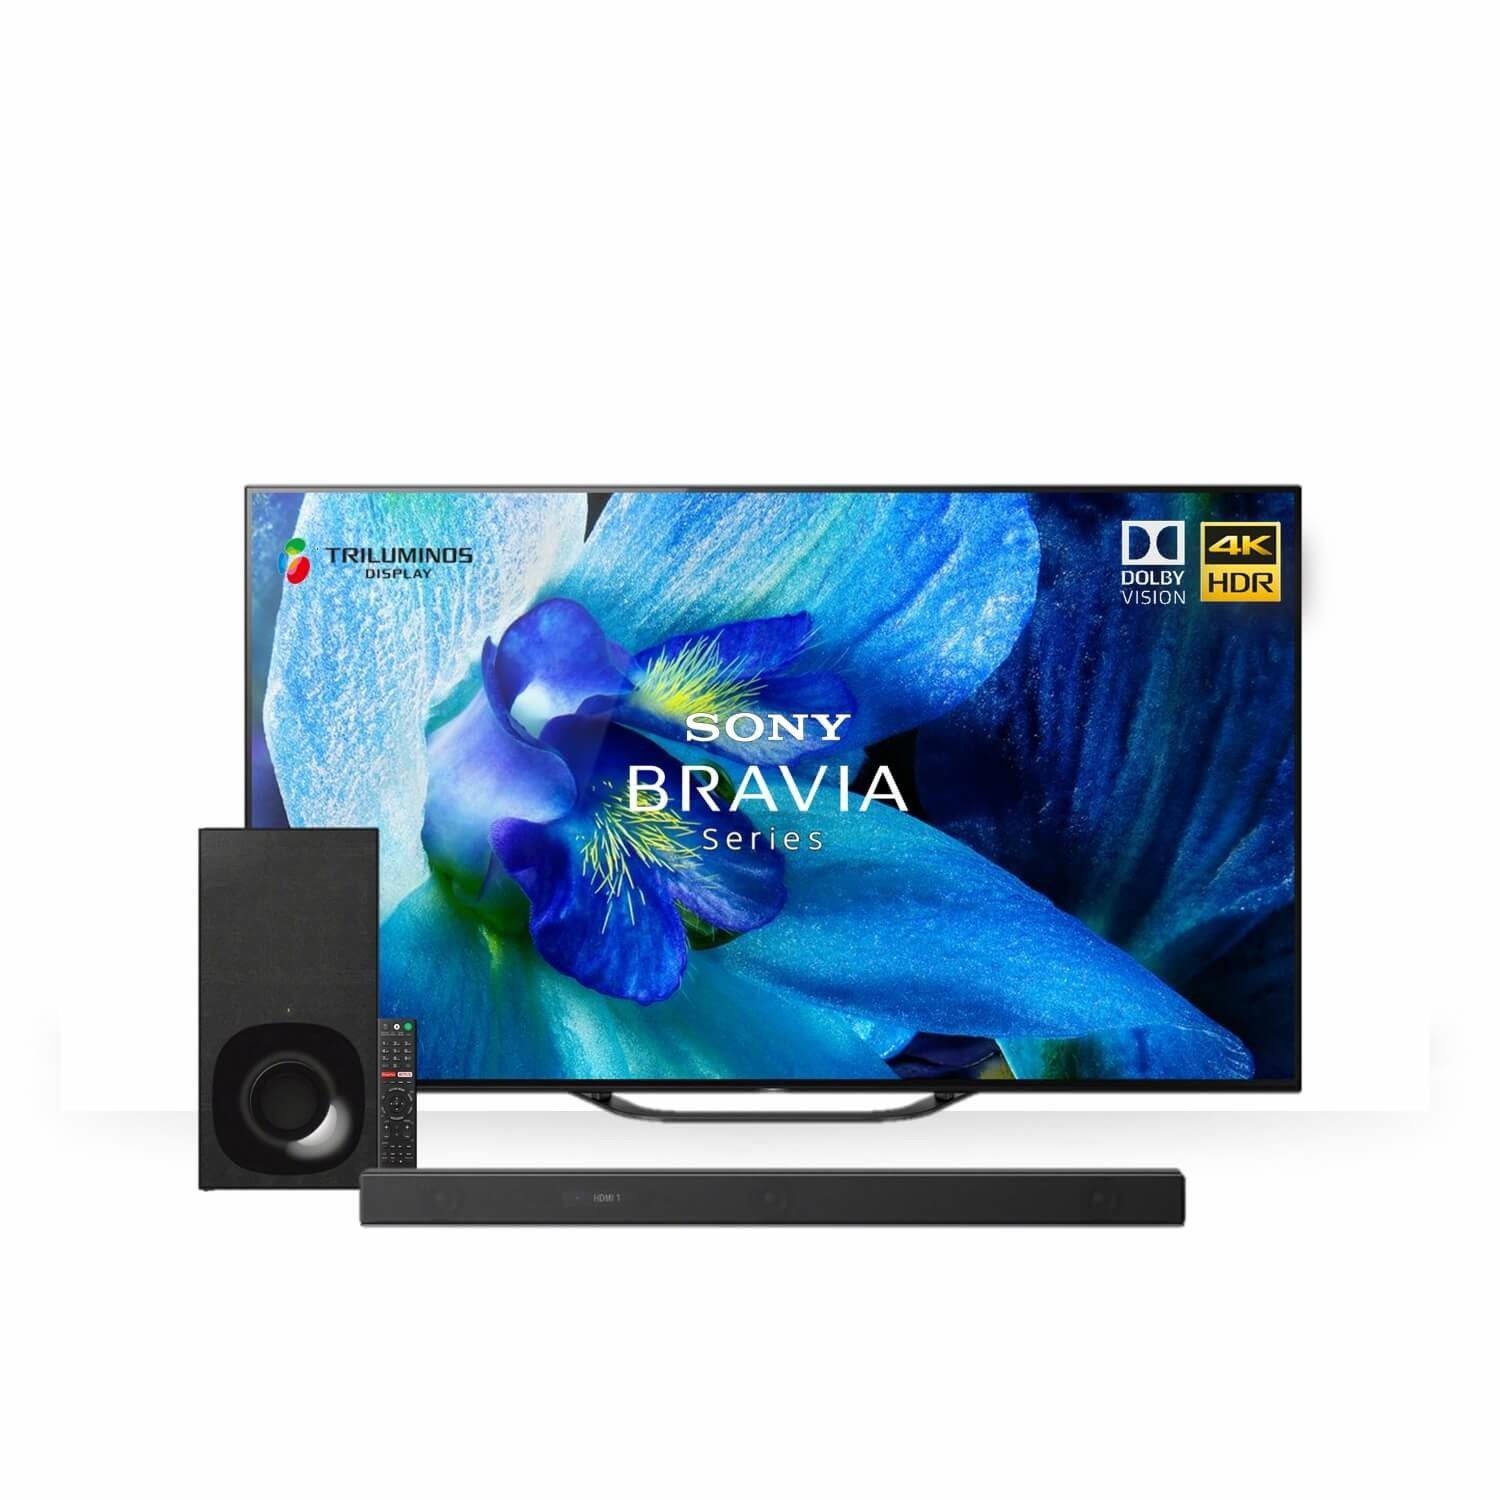 subwoofer for sony bravia tv